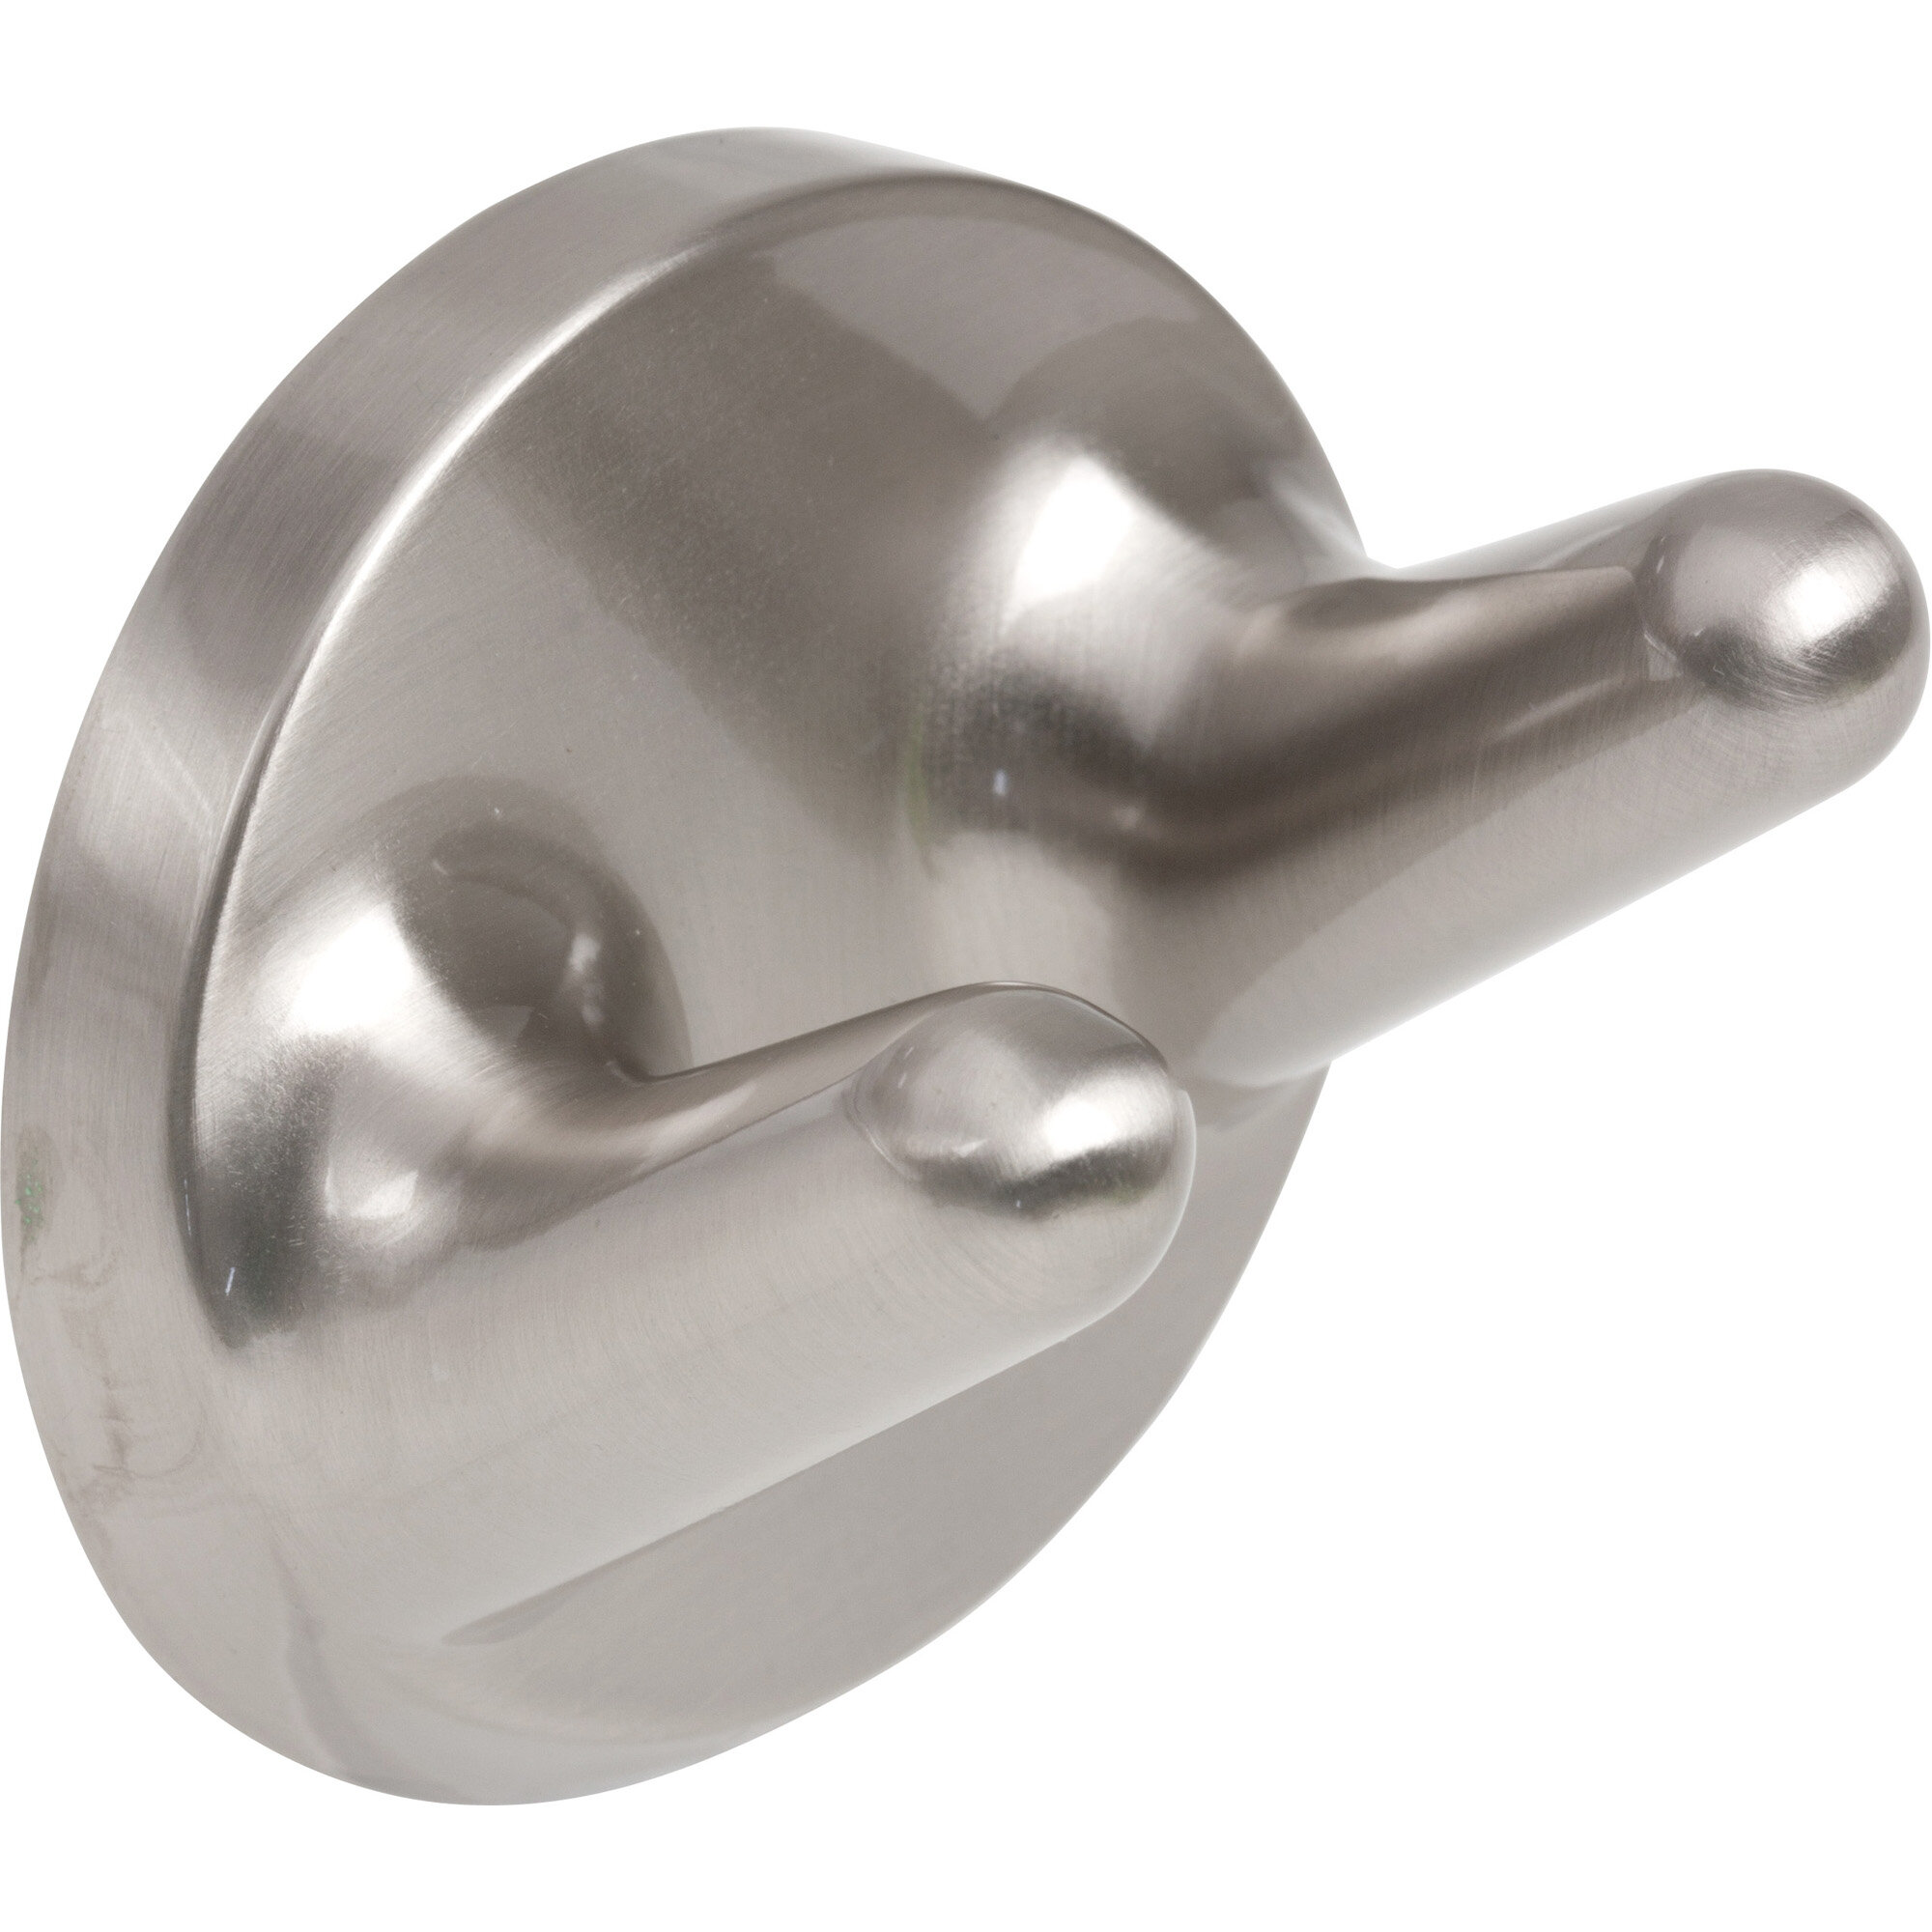 Galesville Wall Mounted Double Robe Hook